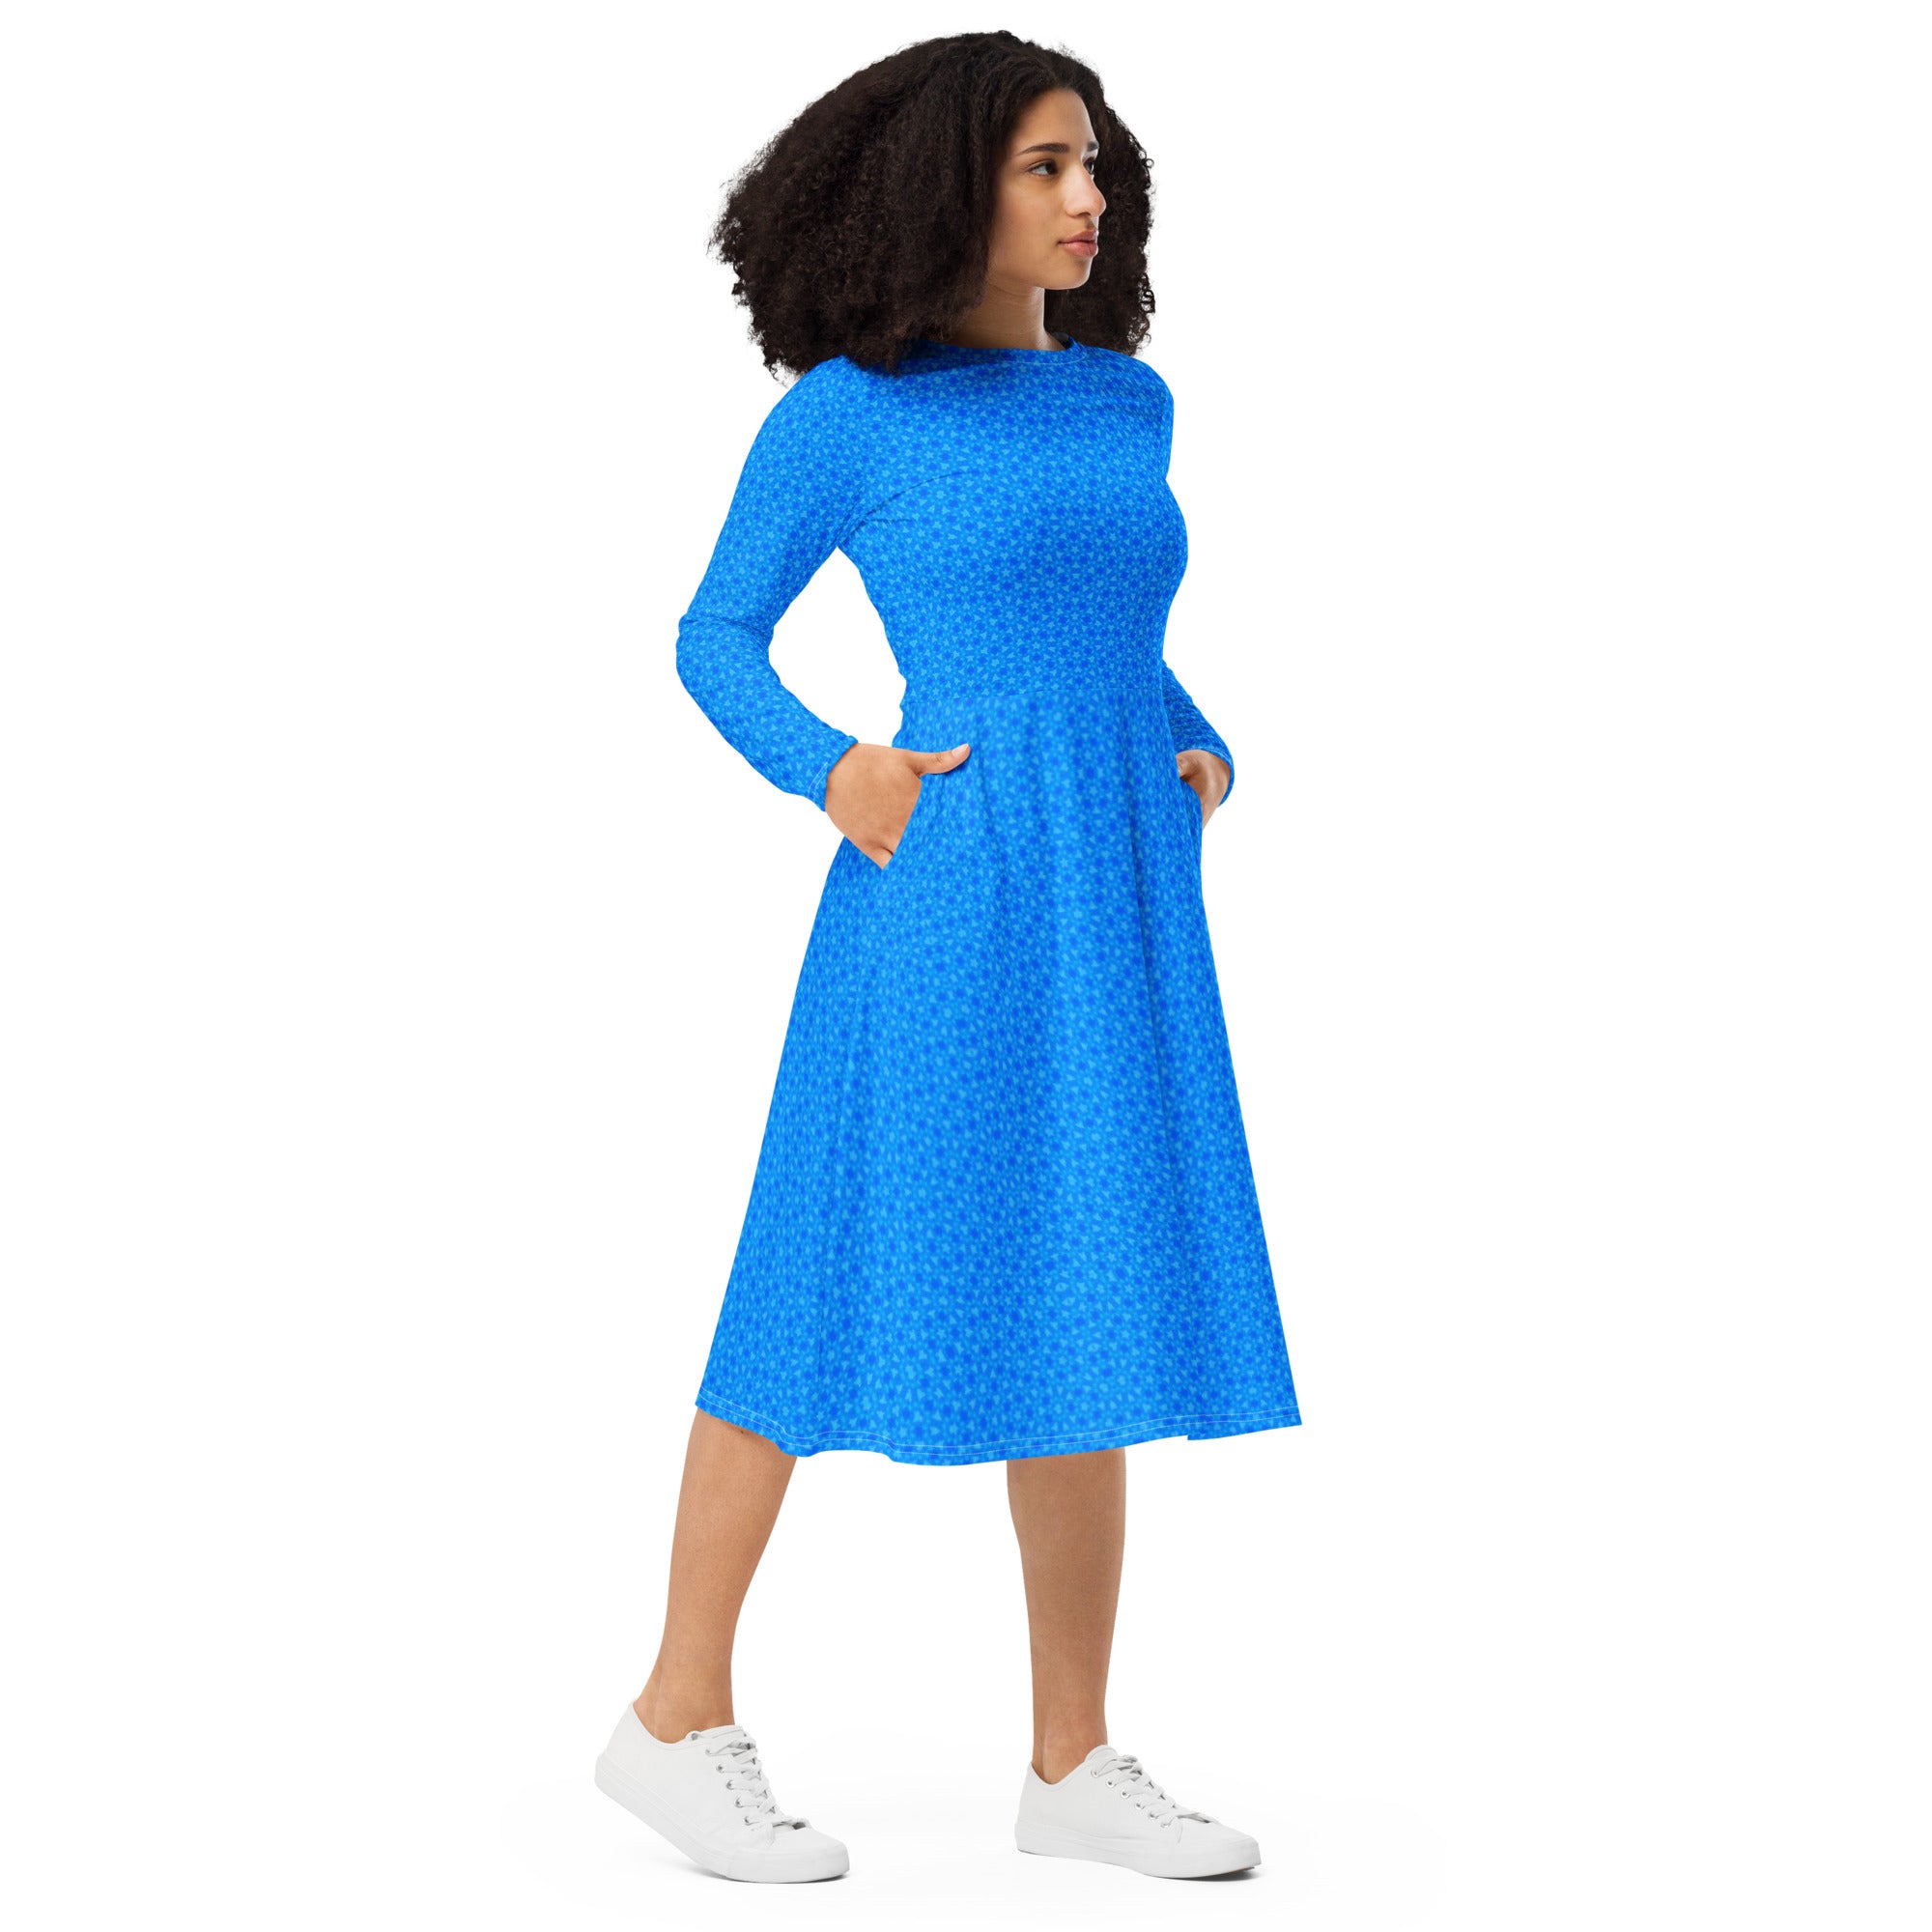 Deep blue sky Rosy patterned narrow fitted long sleeve midi dress, by Sensus Studio Desin